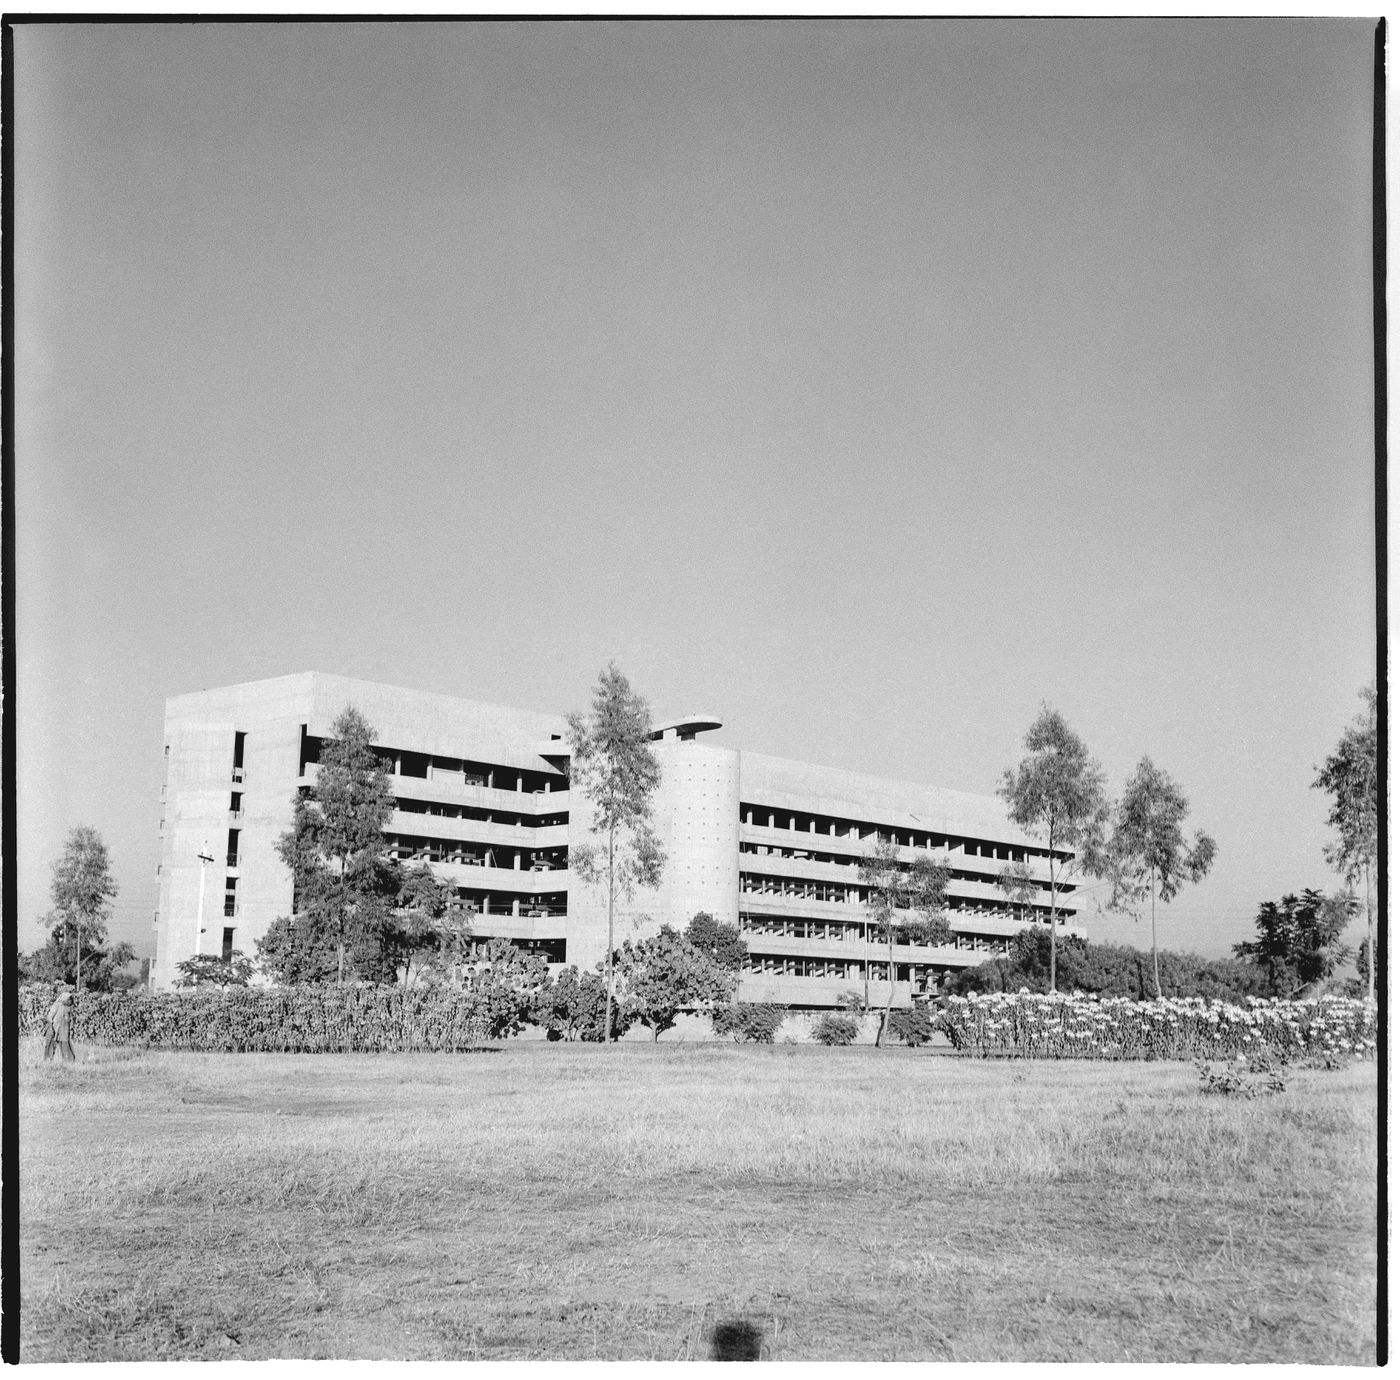 Research Block of the Postgraduate Institute of Medical Education and Research (PGIMER), Sector 12, Chandigarh, India